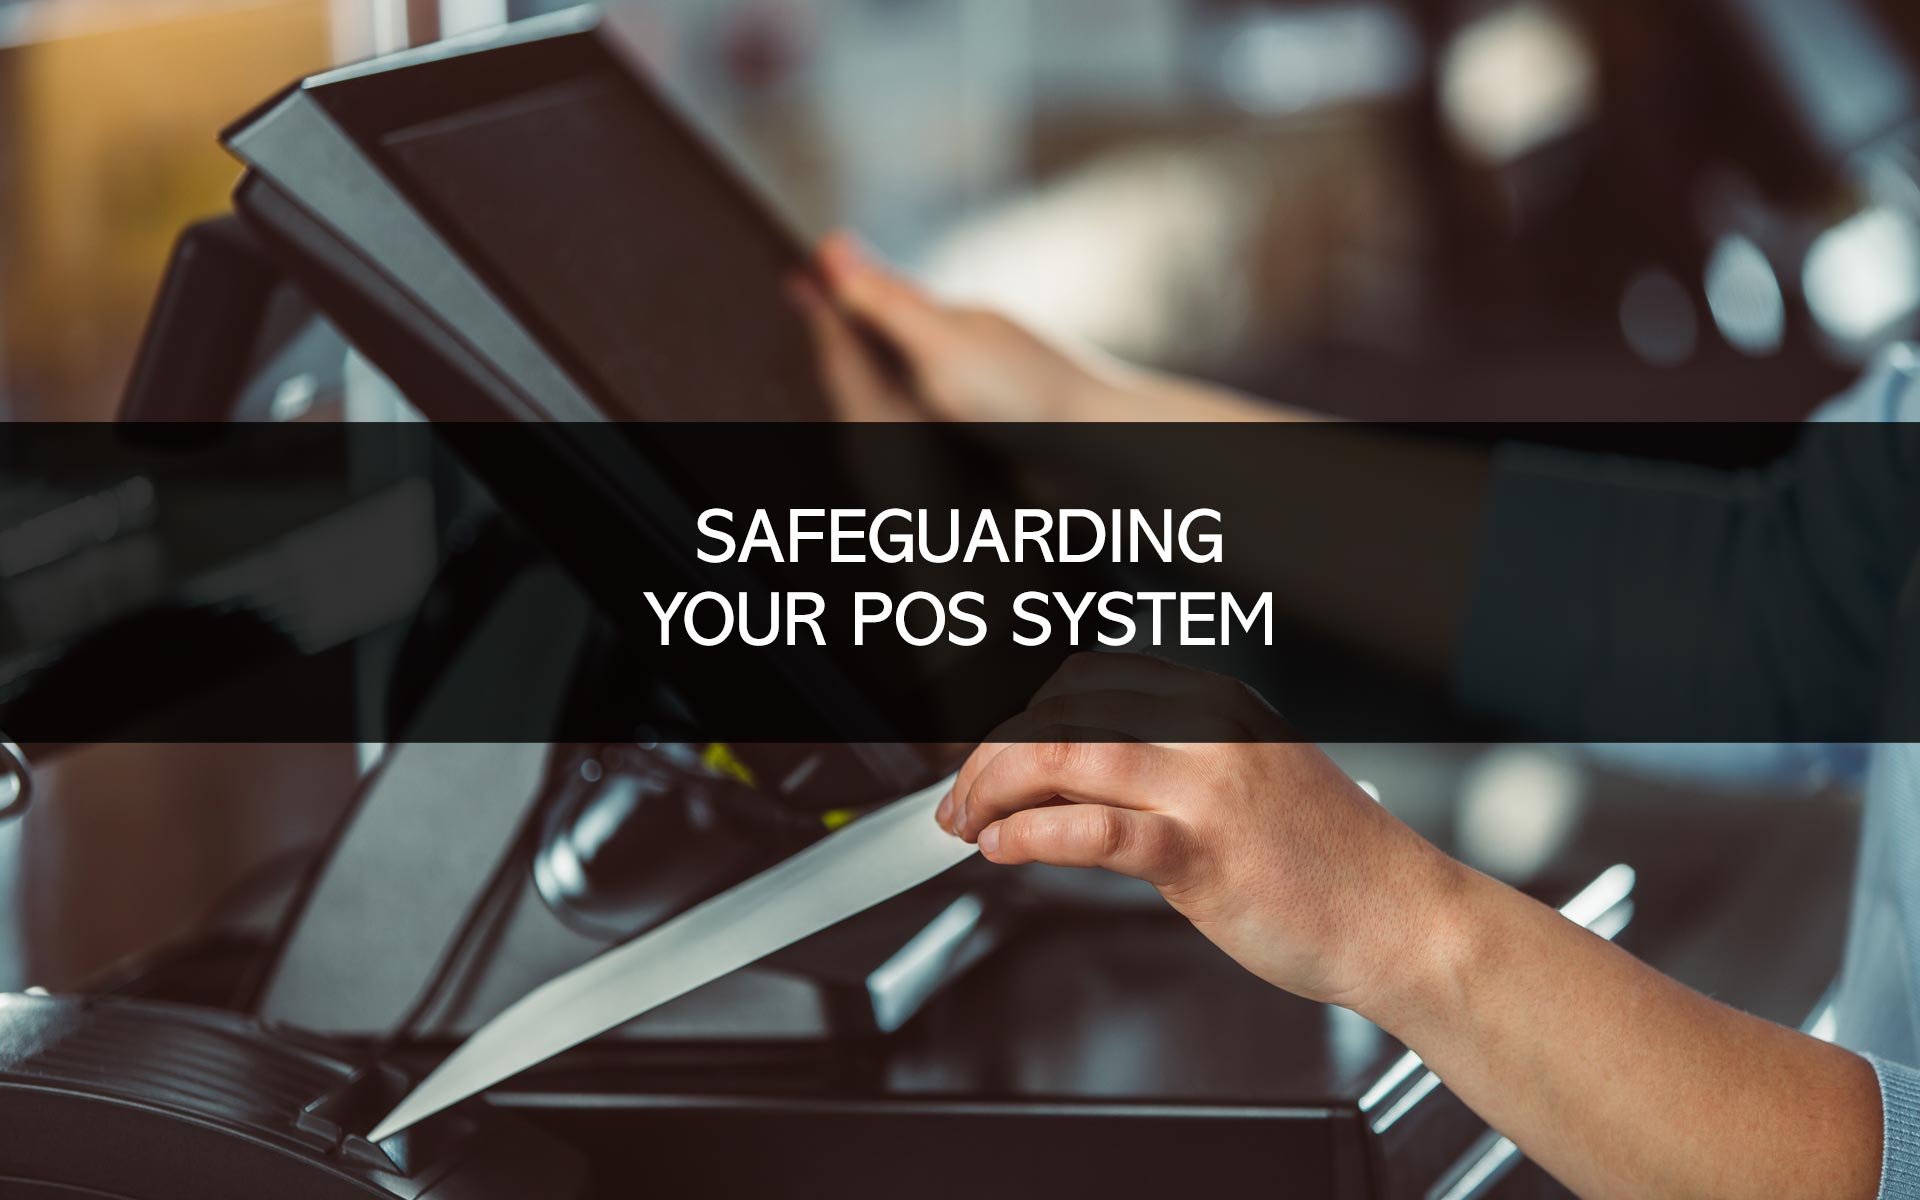 Safeguarding Your POS System